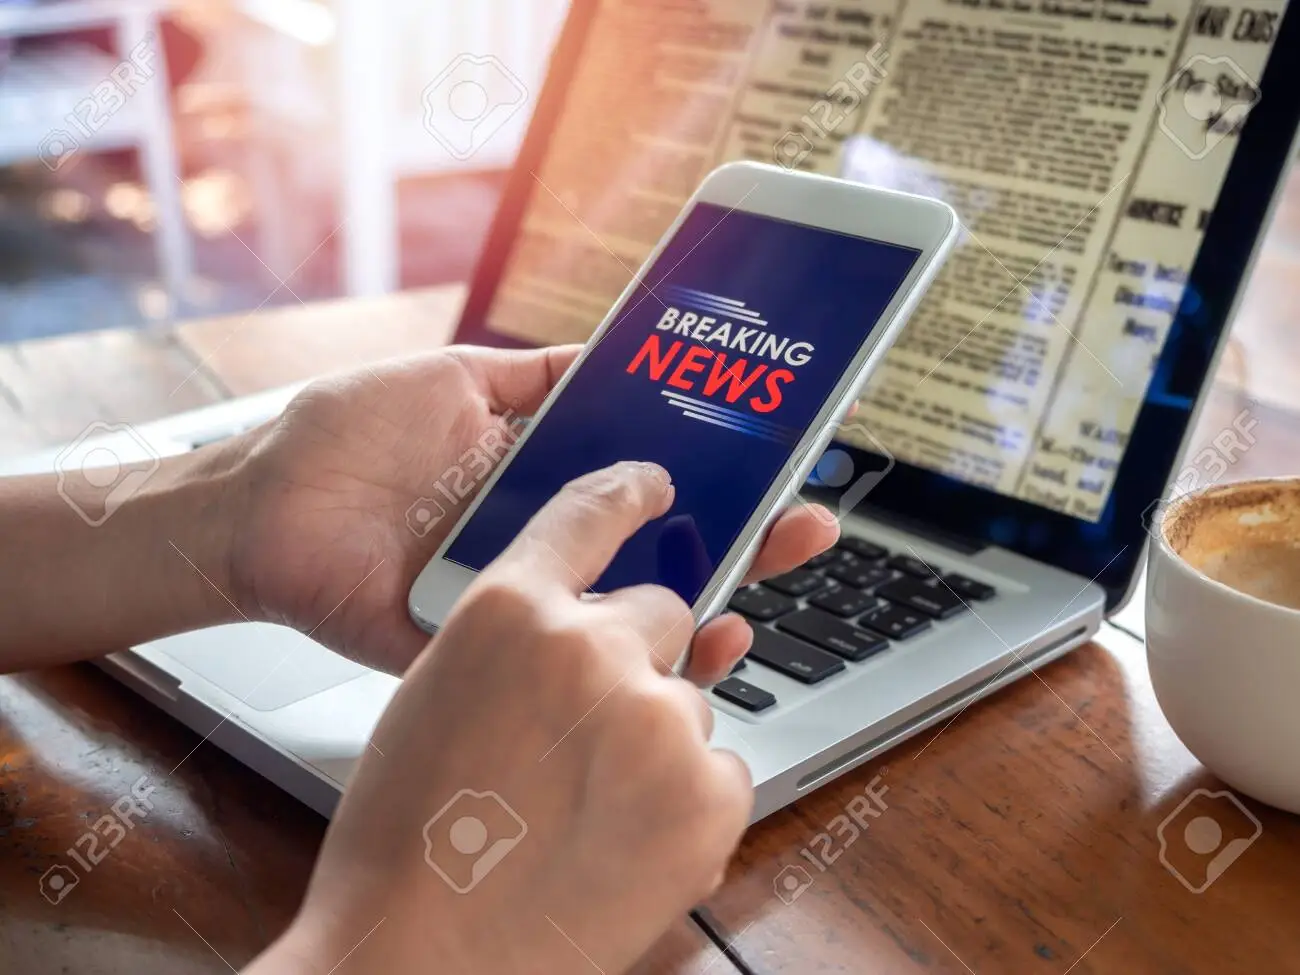 Comparison of the 10 Best Mobile Apps for News